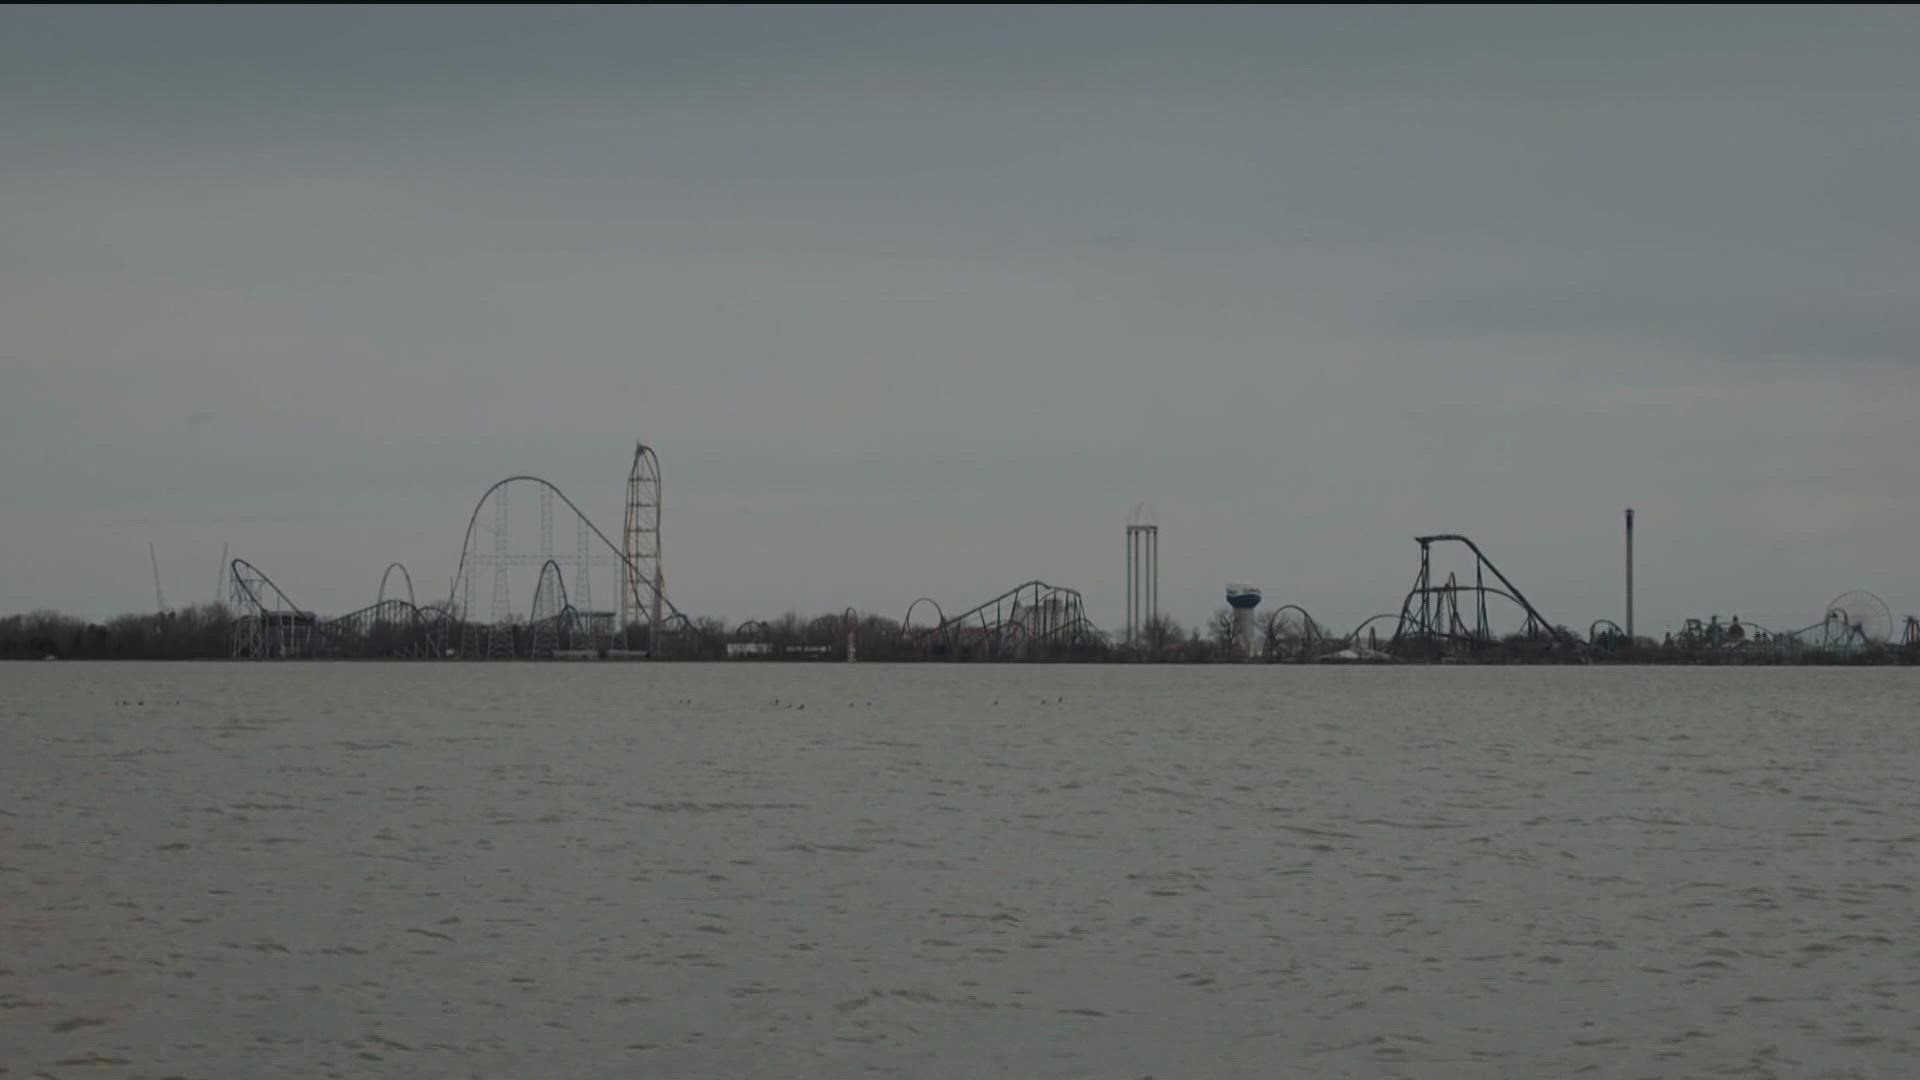 Erie County prosecutor Kevin Baxter said he doesn't know if Cedar Point did its own sexual harassment training.